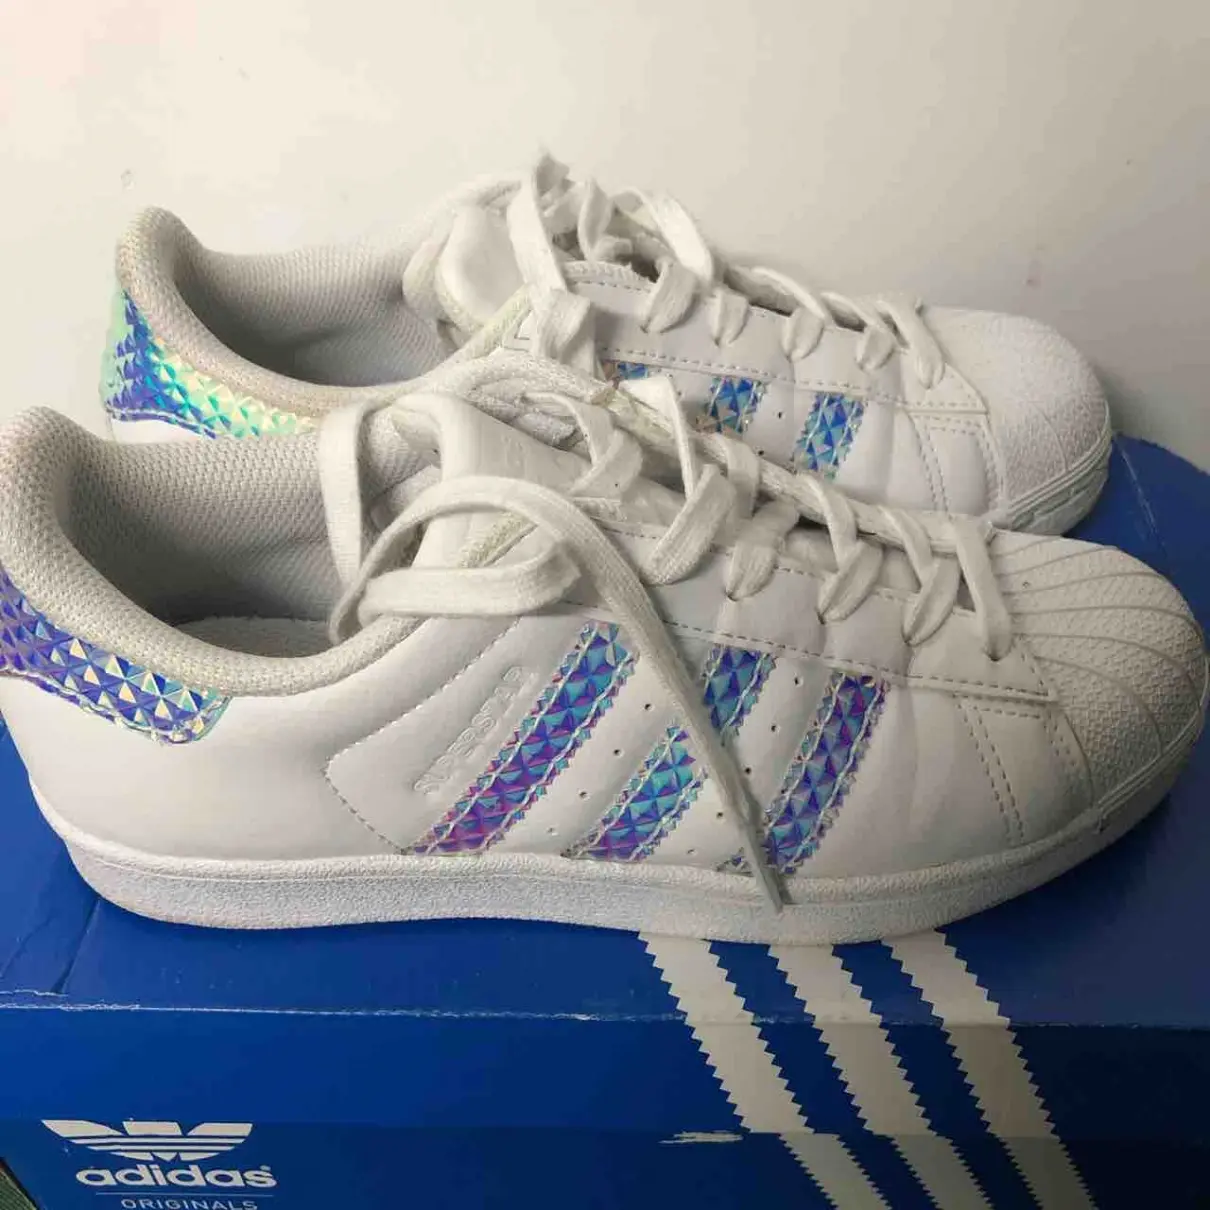 Buy Adidas Superstar leather trainers online